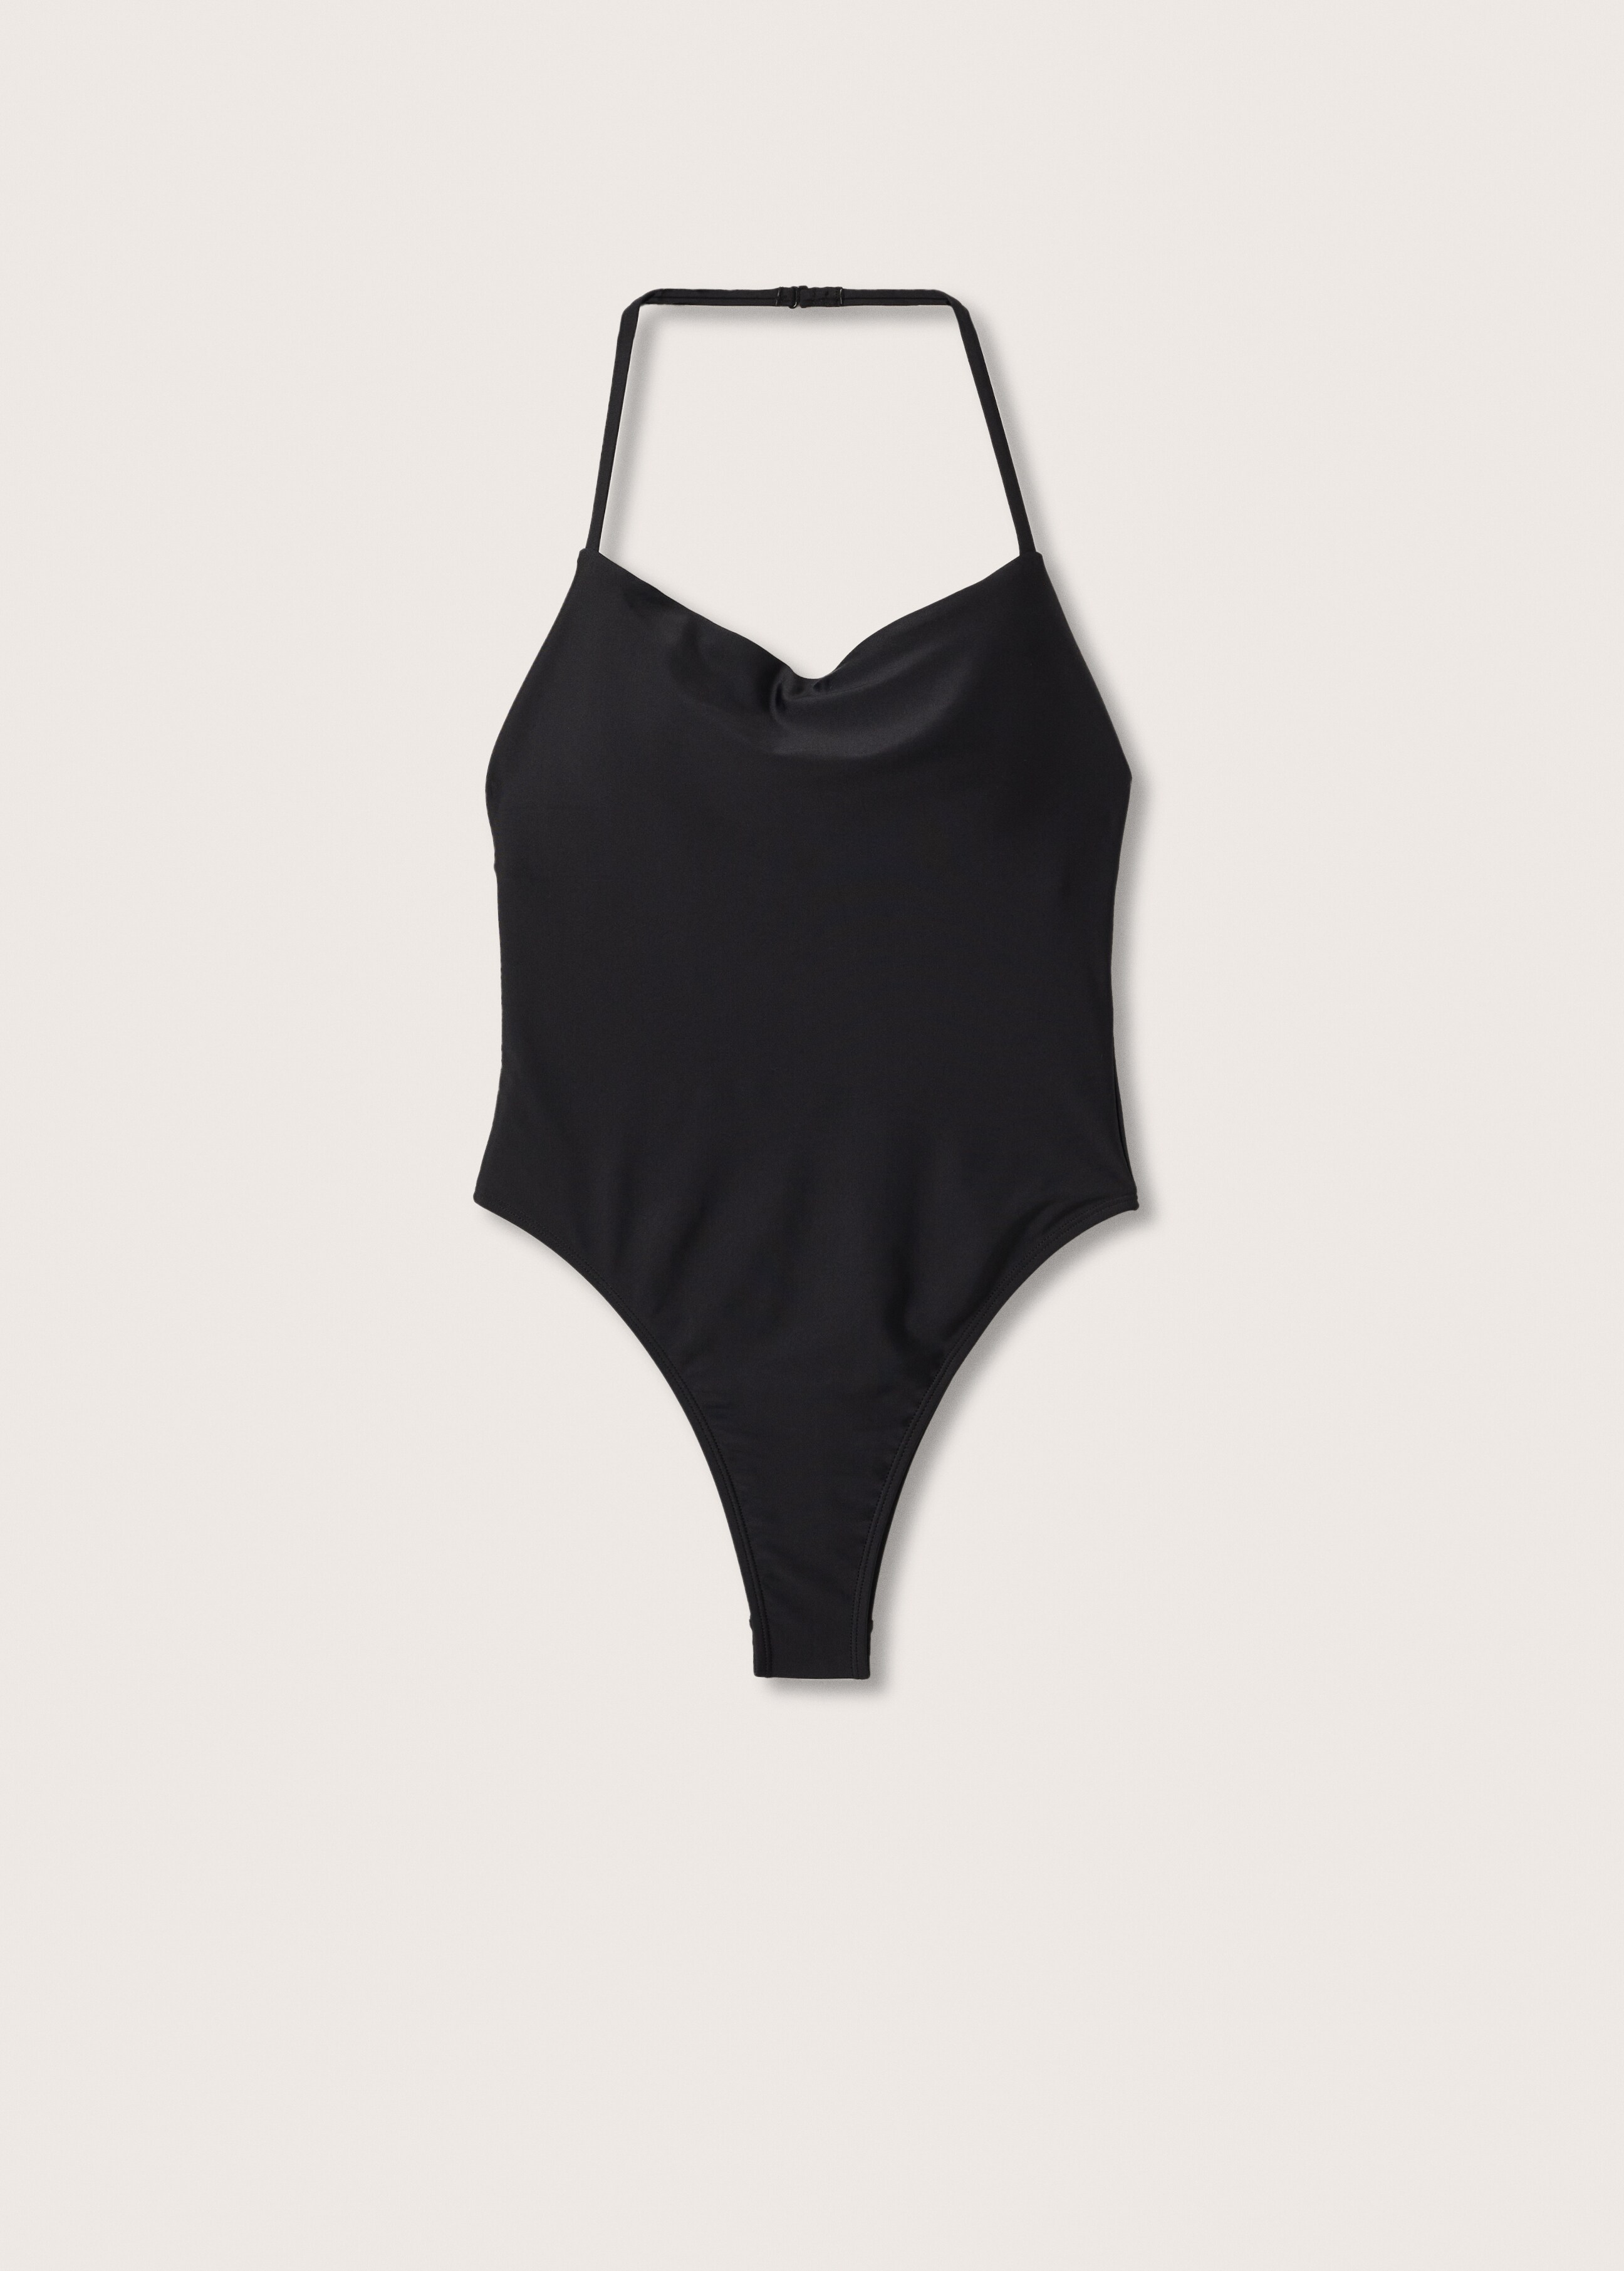 Open-back swimsuit - Article without model